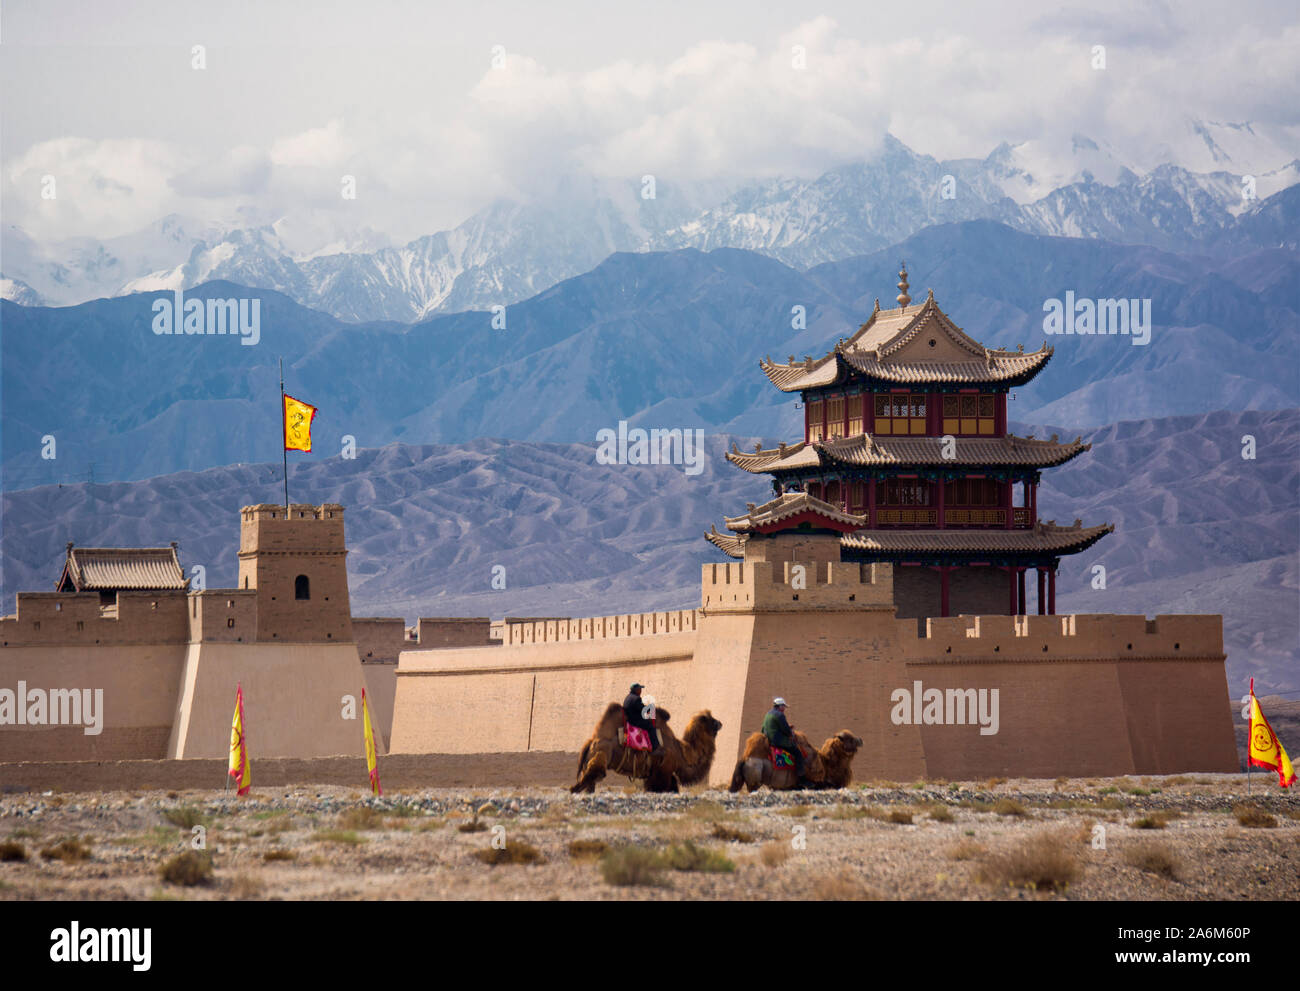 The Qilian Mountains behind the Jiayugian Fort, where camel caravans entered ancient to China after crossing the central Asian desert Stock Photo